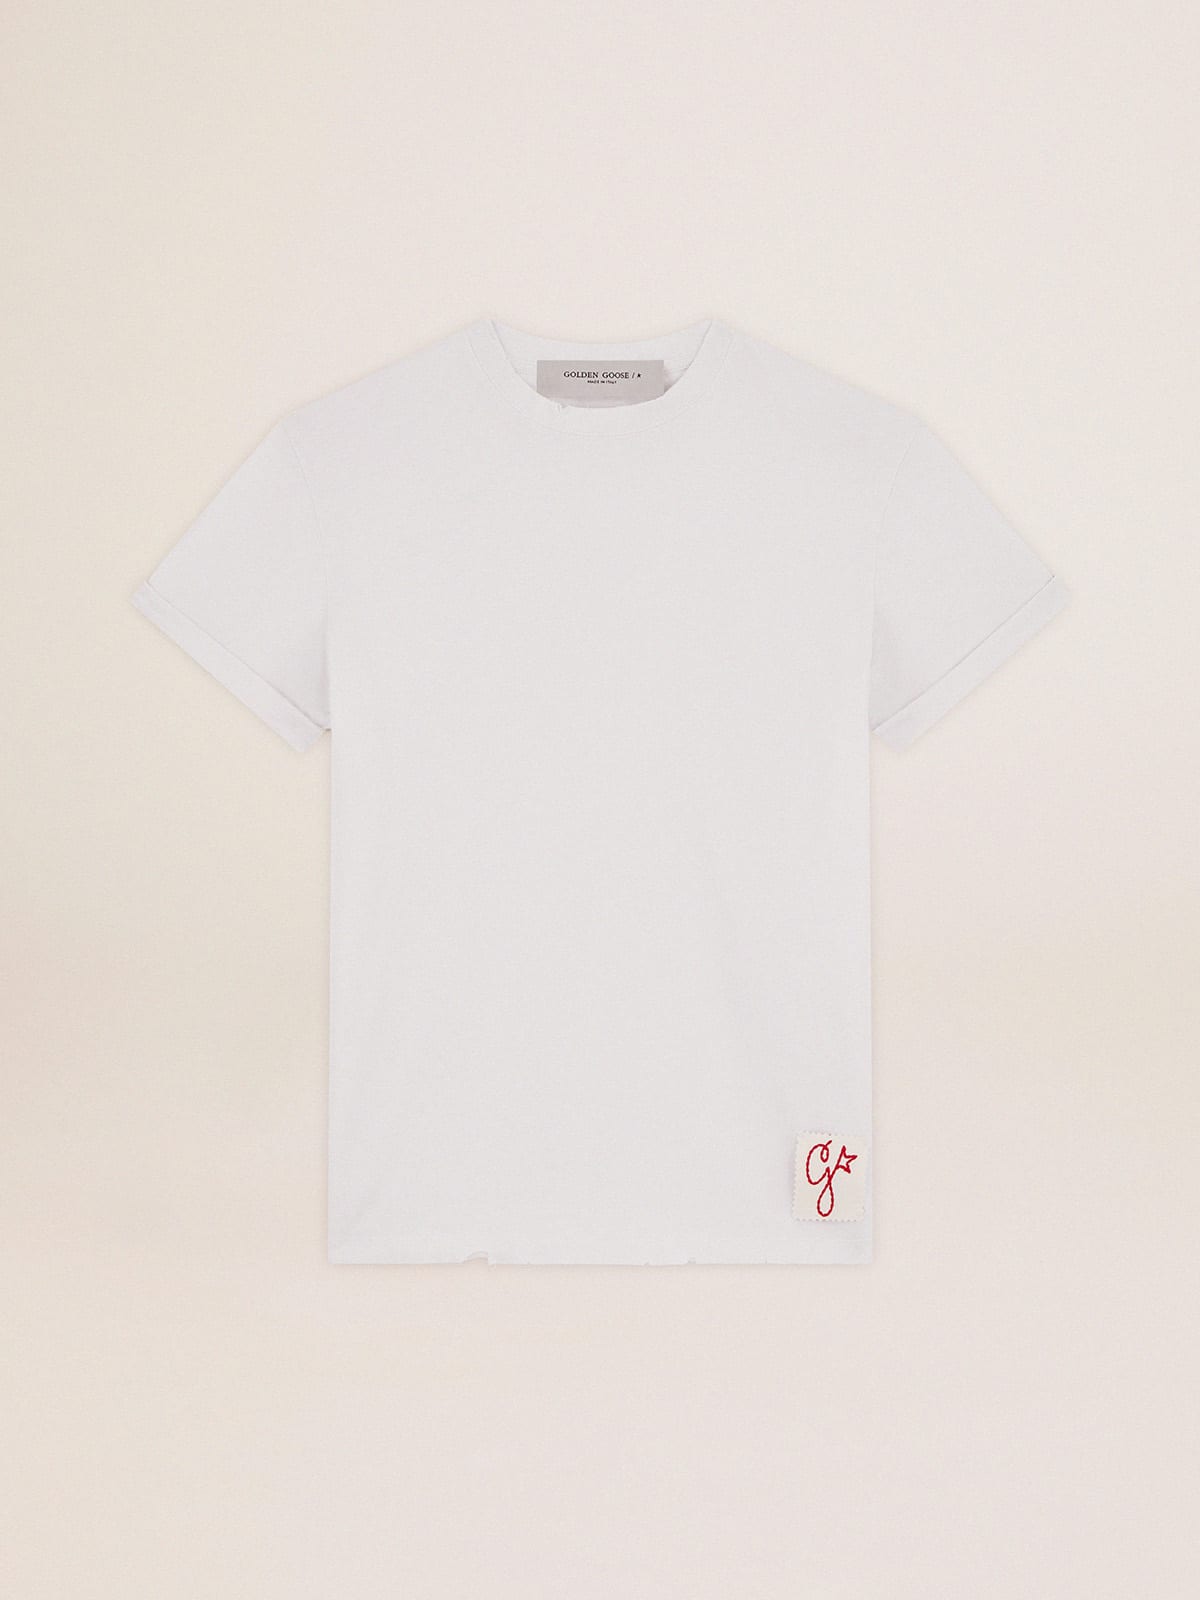 Distressed slim-fit T-shirt in white